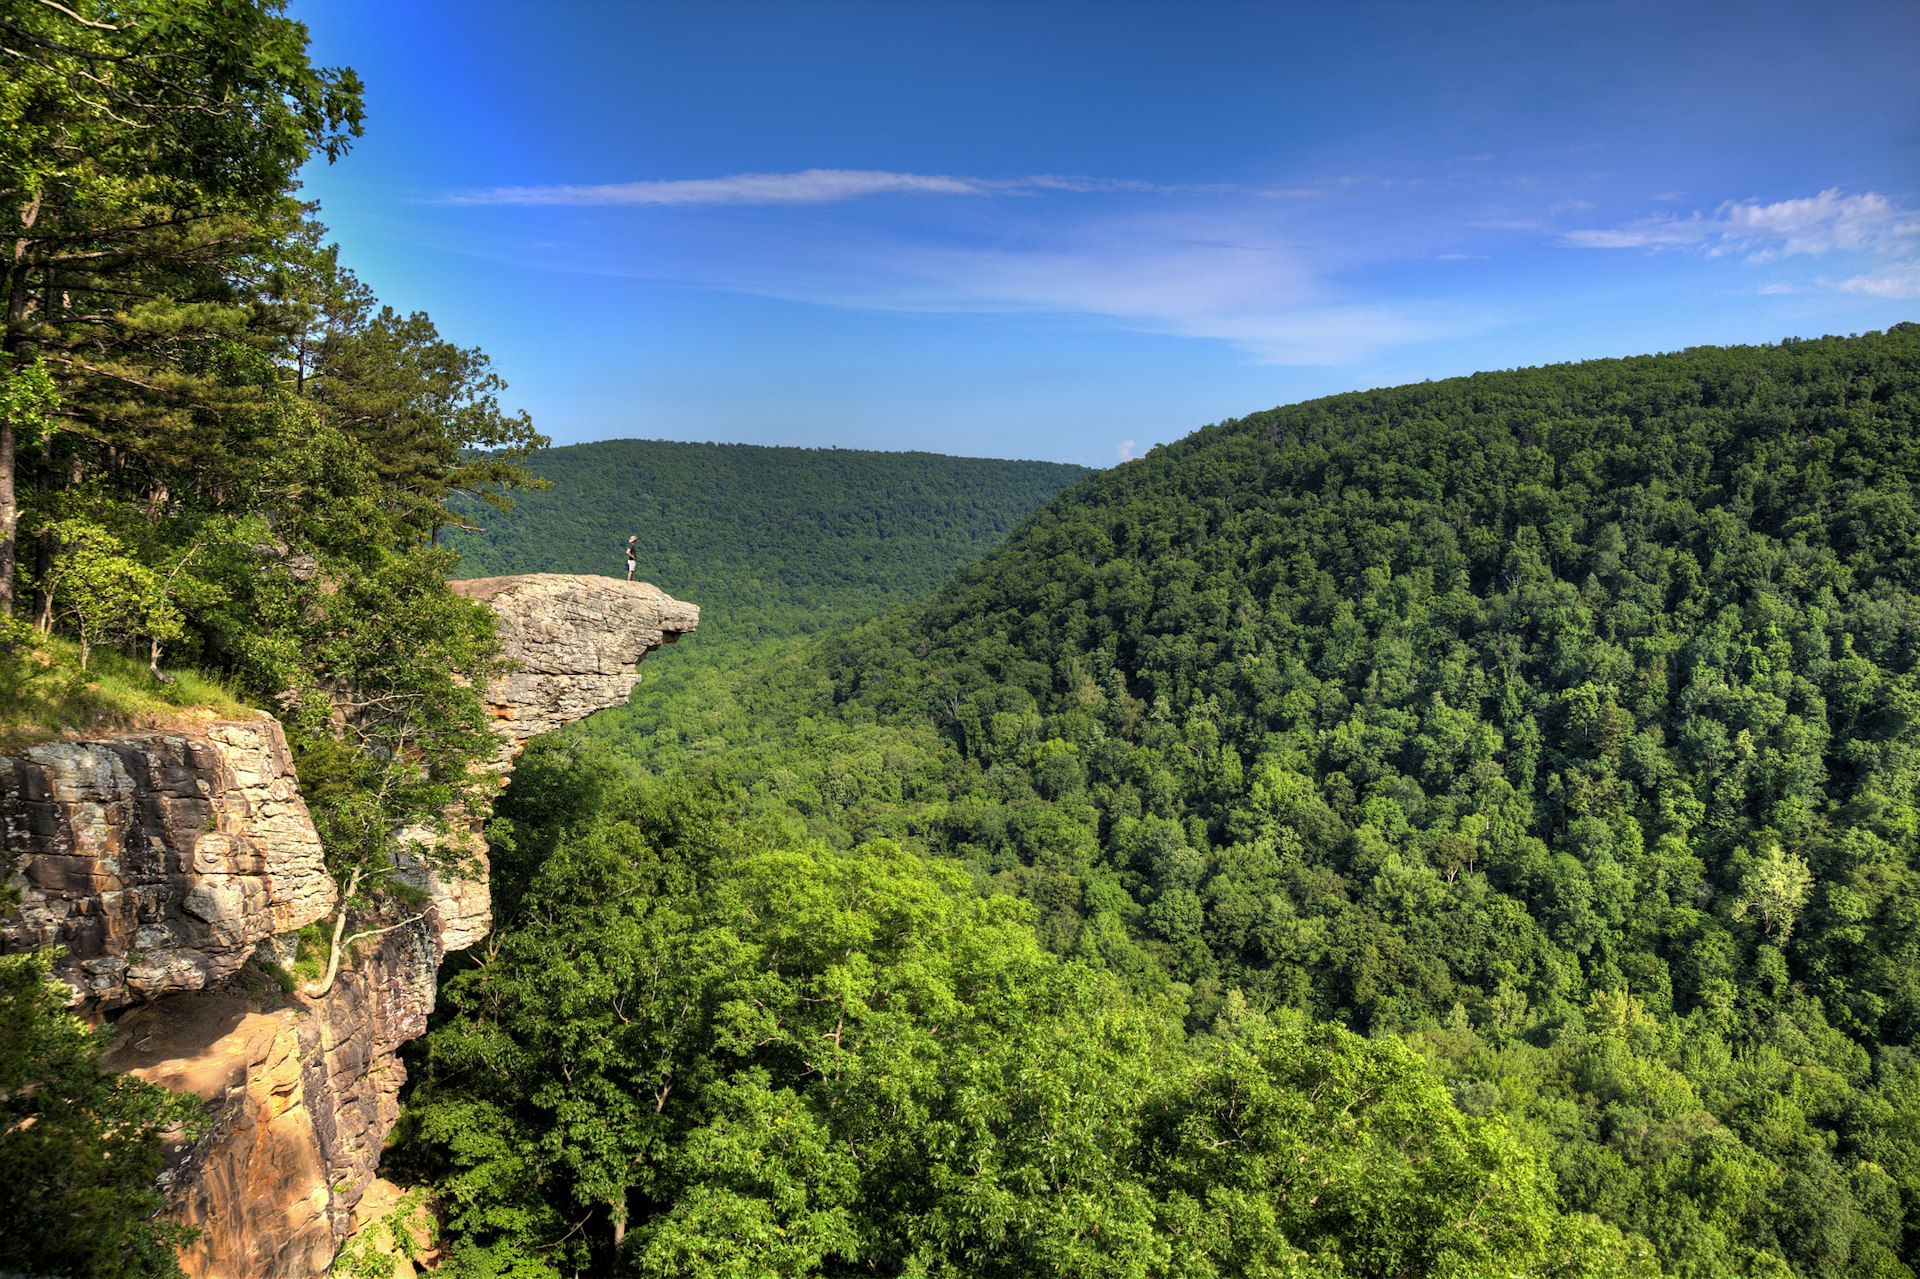 A person standing on the famed rocky outcrop on Whitaker's Point trail in the Ozarks, Arkansas